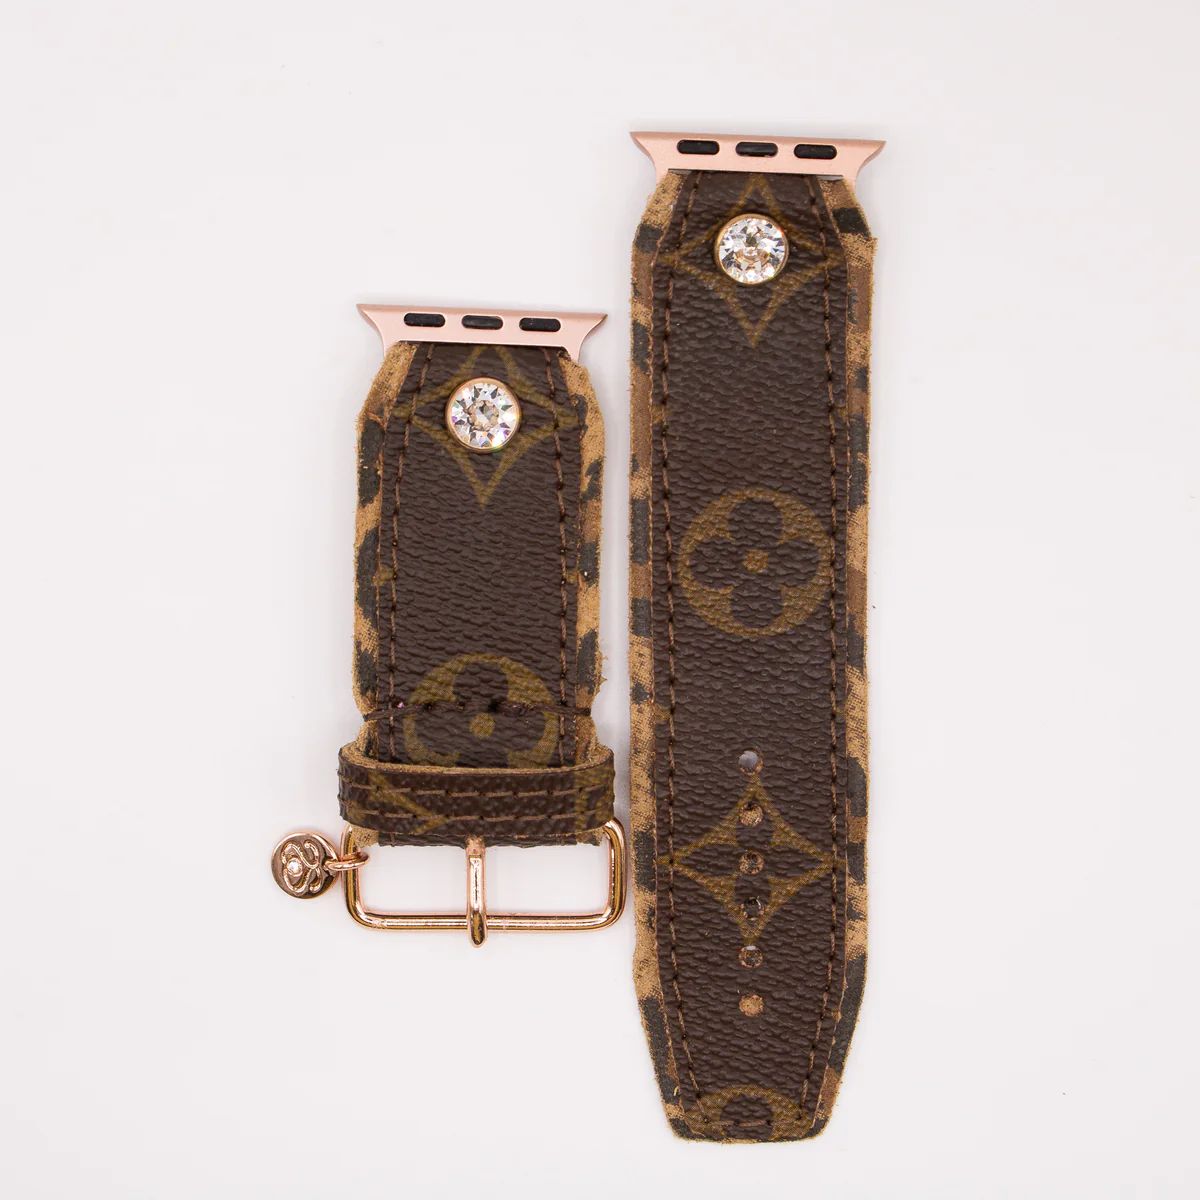 Ready to Ship - Upcycled LV Monogram with Leopard Watchband (Size 3, Apple Watch 38-41mm) | Spark*l